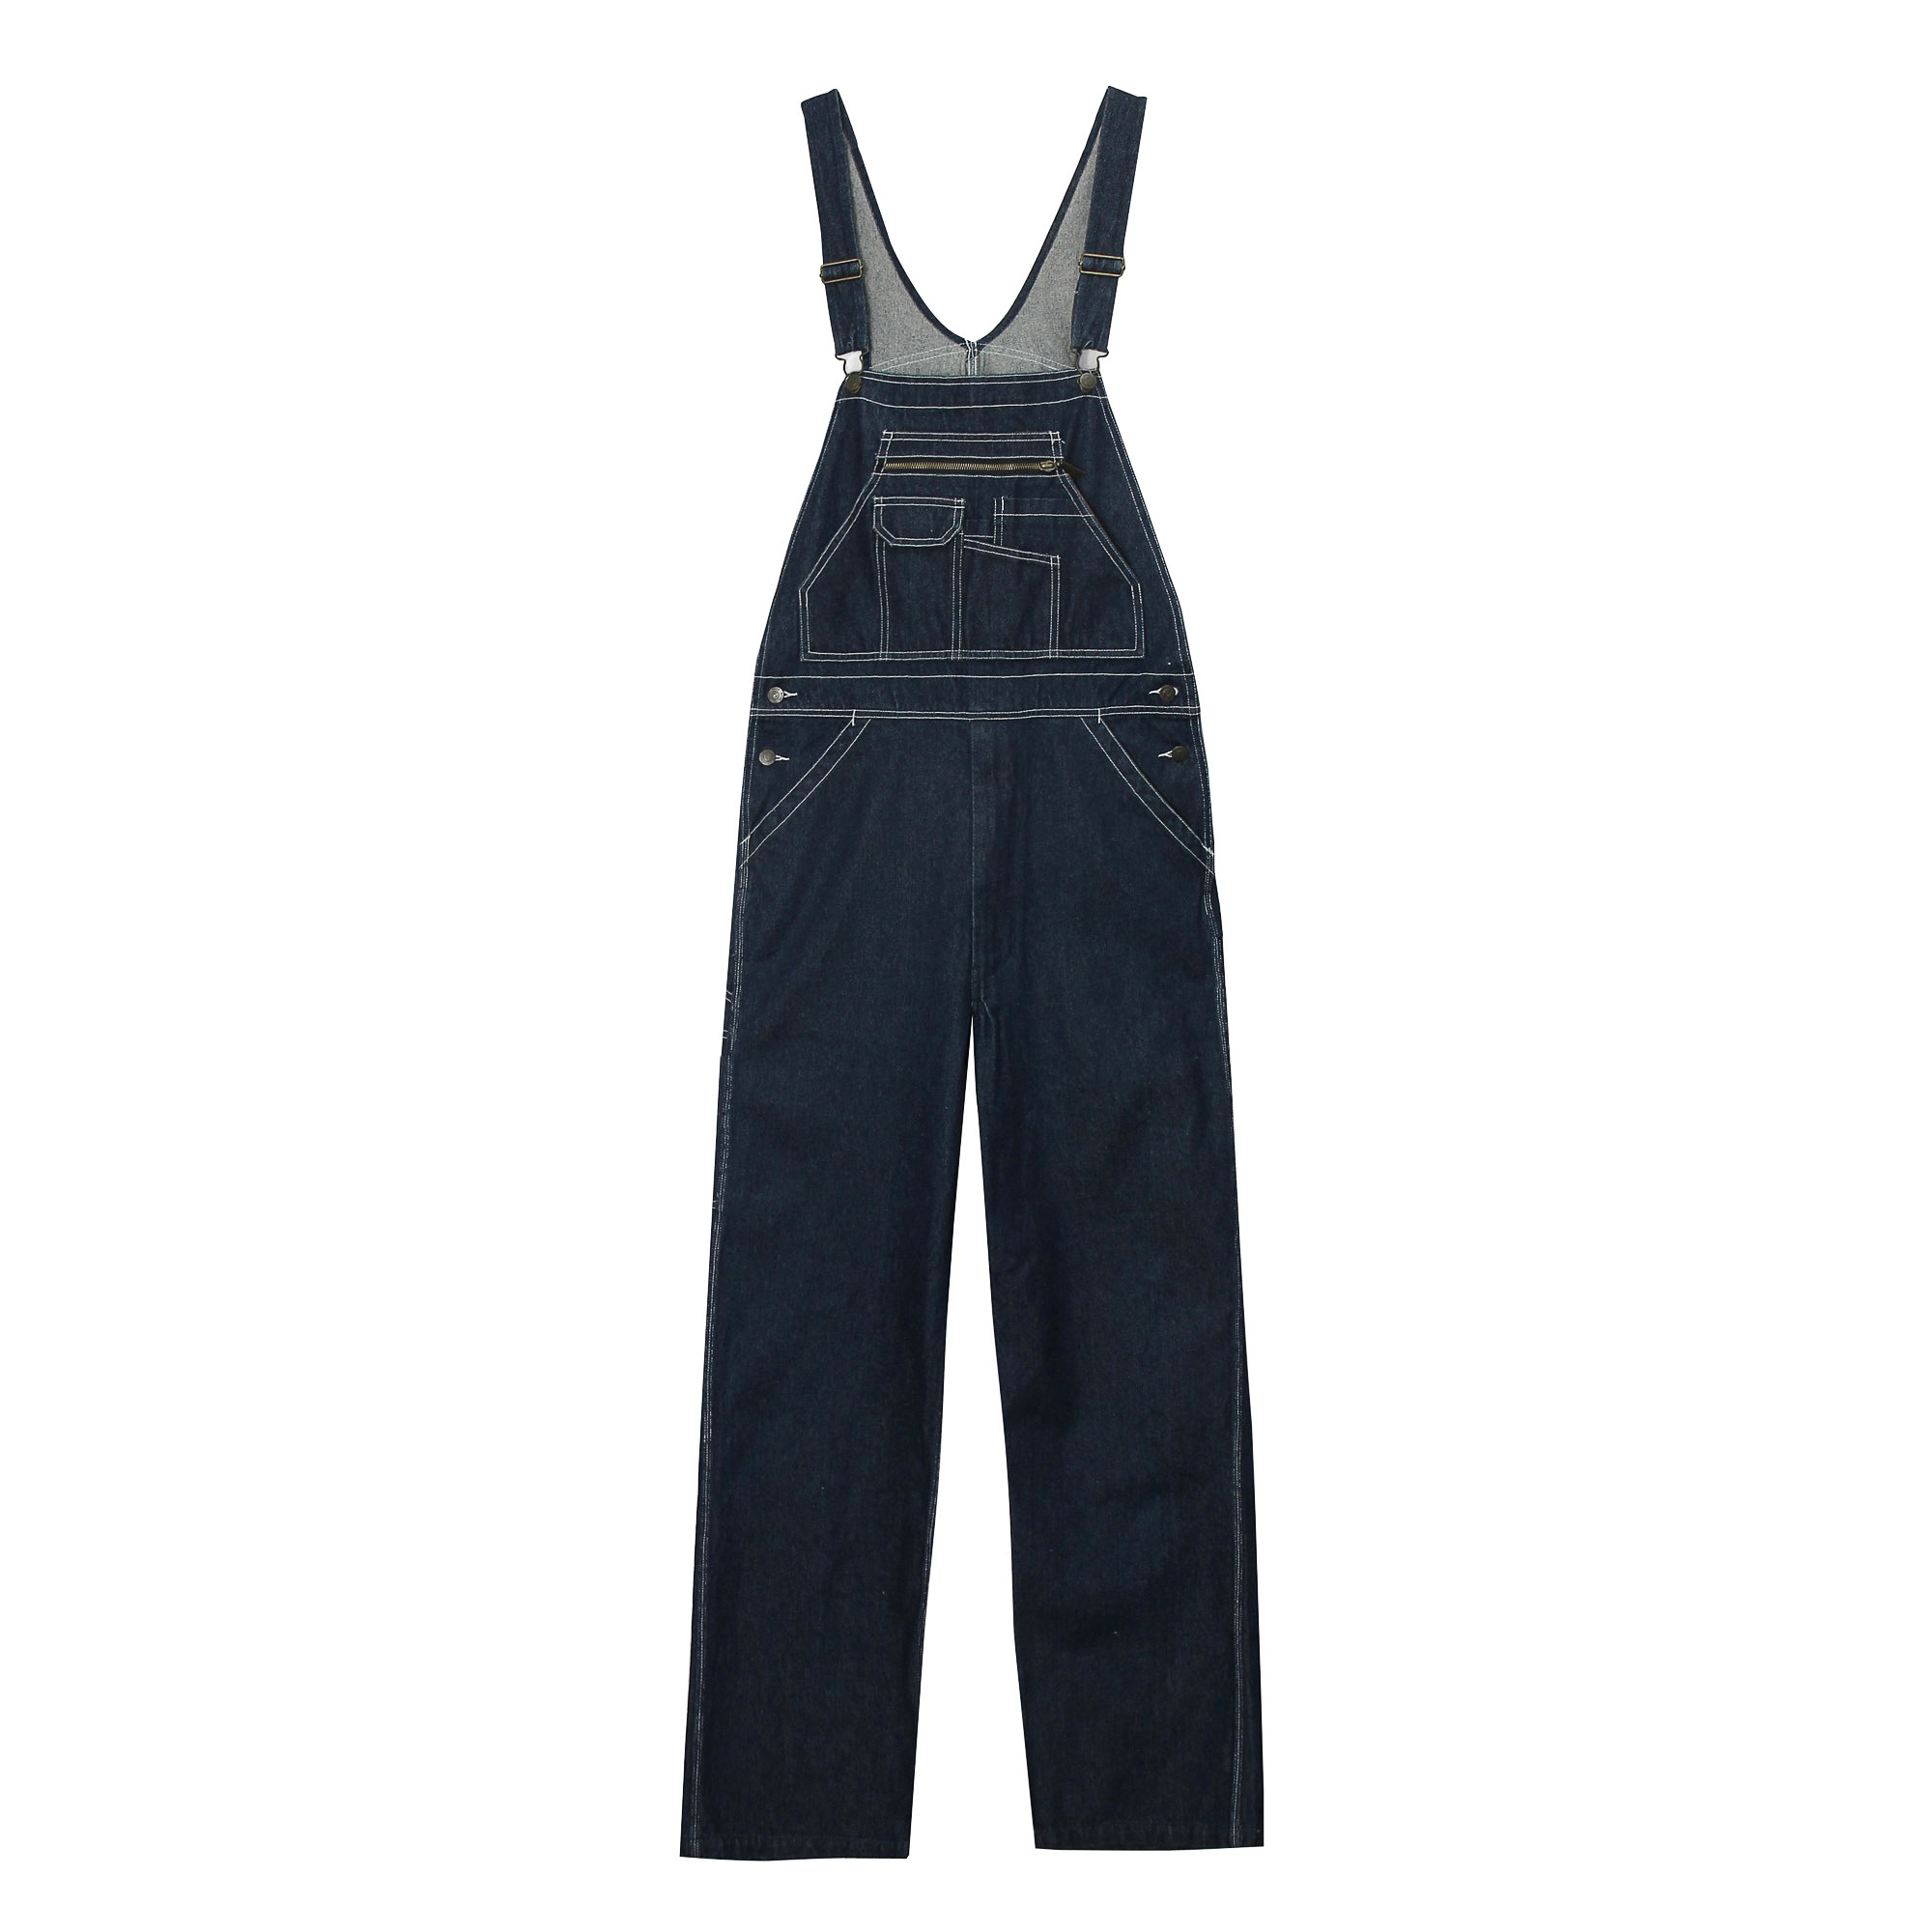 Fr Denim Bib Overall for Workwear Nomex Fire Resistant Fabric